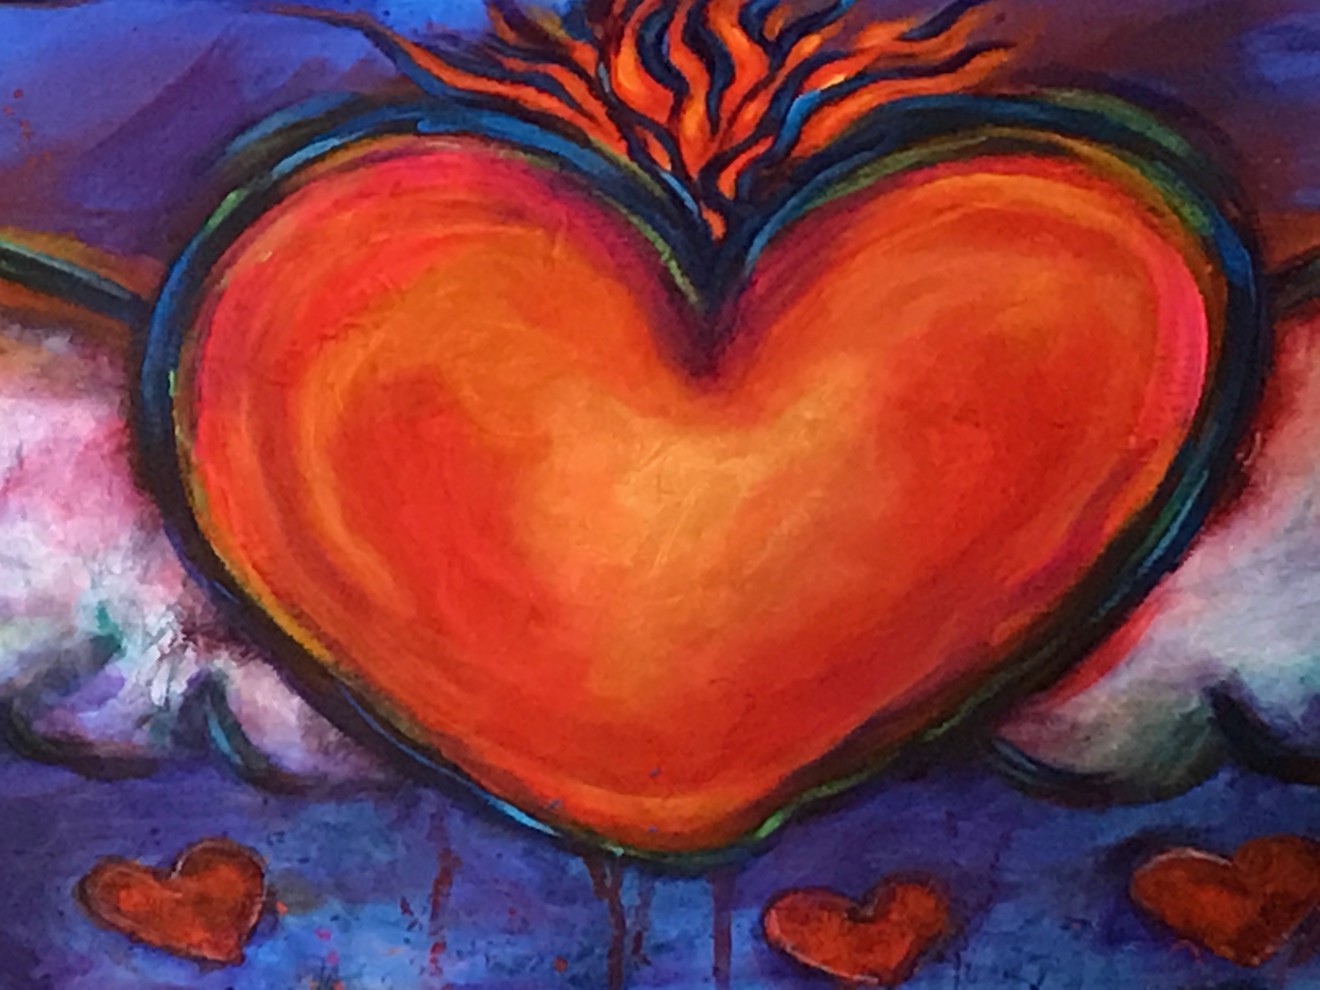 Feel the love for Joe Ray and other local artists featured in “Caliente” at Practical Art.